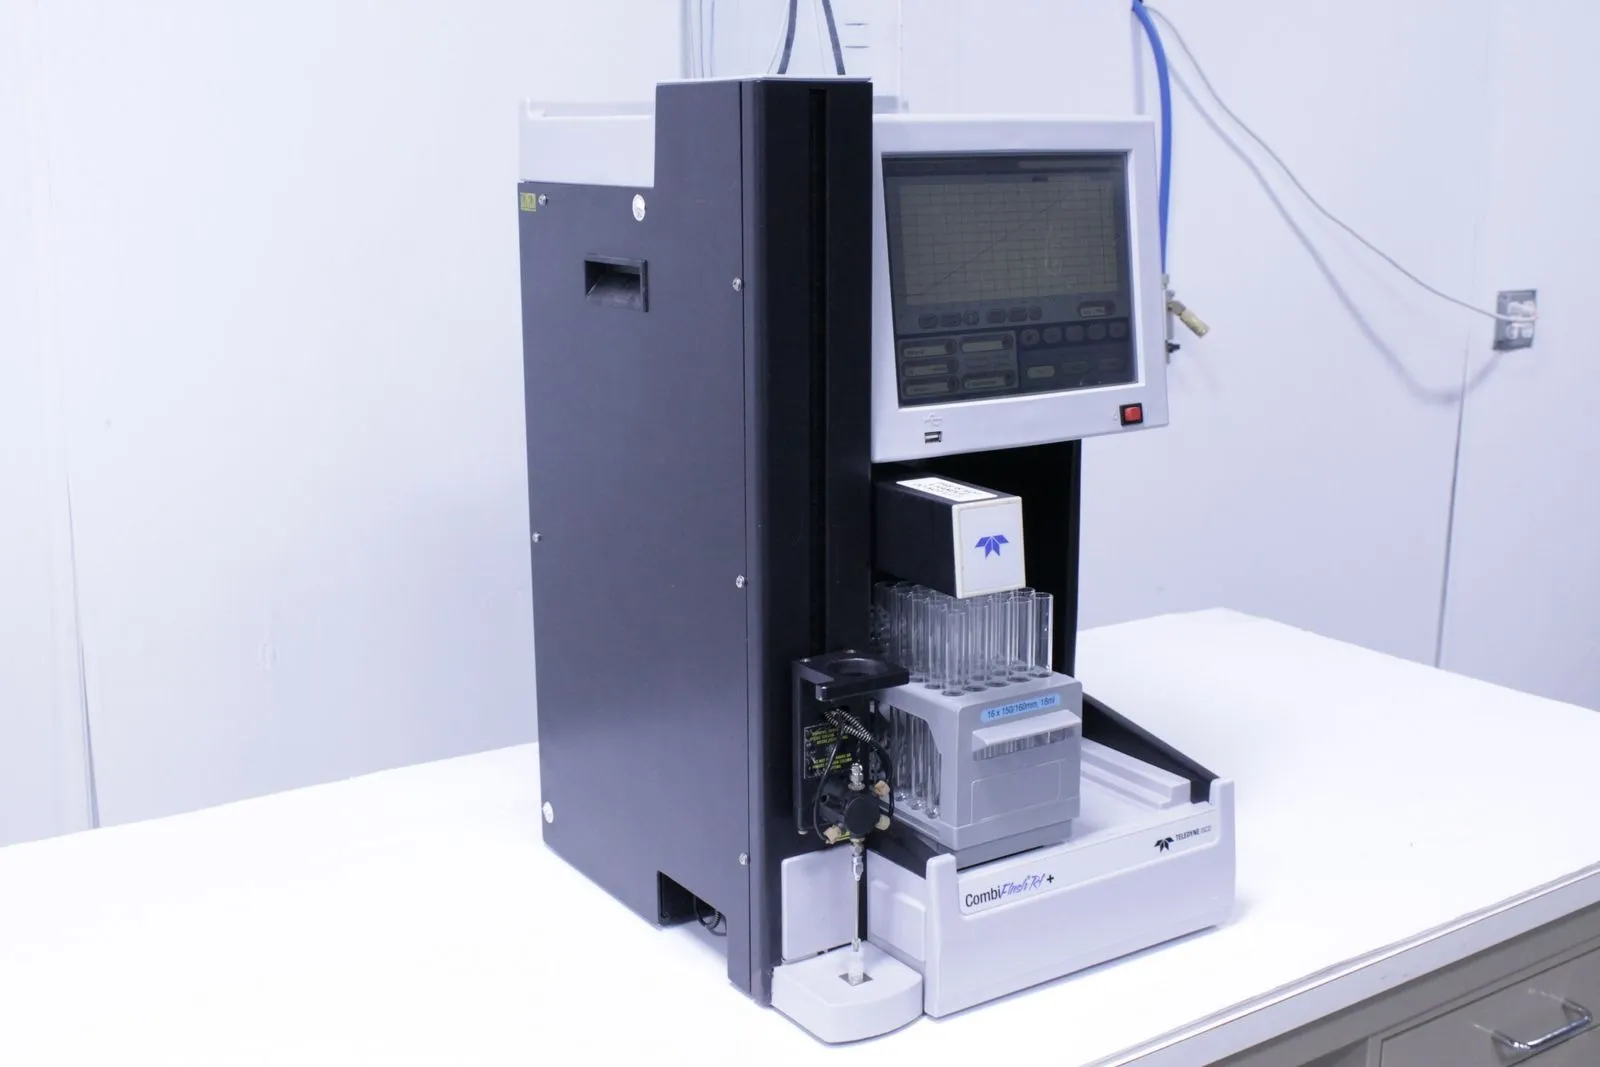 Service & Repair CombiFlash Flash Chromatography Systems from Teledyne Isco